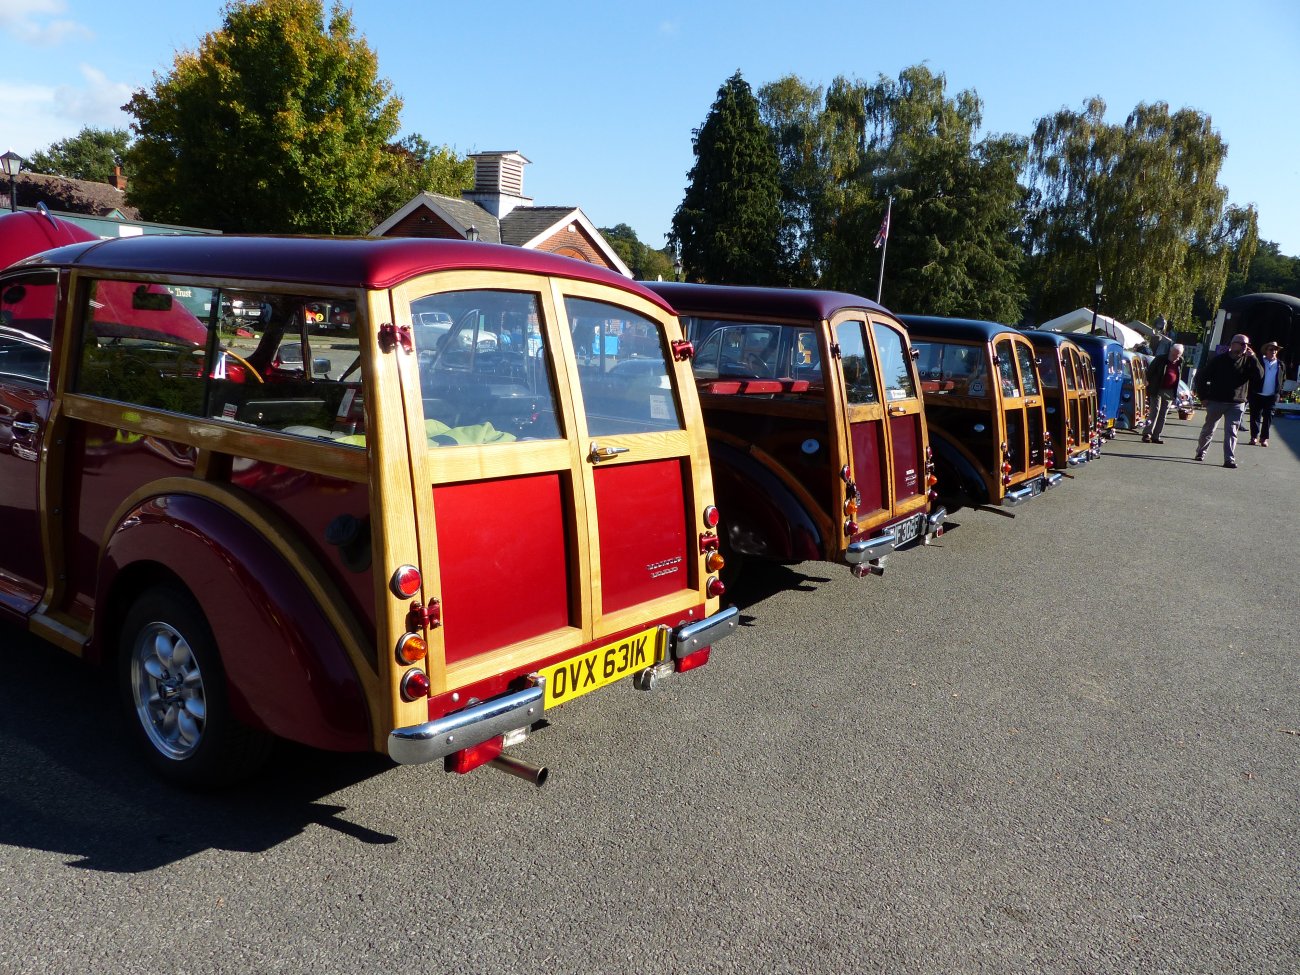 View of the back of multiple Morris Minors in Whitewebbs Museum's carpark at an event